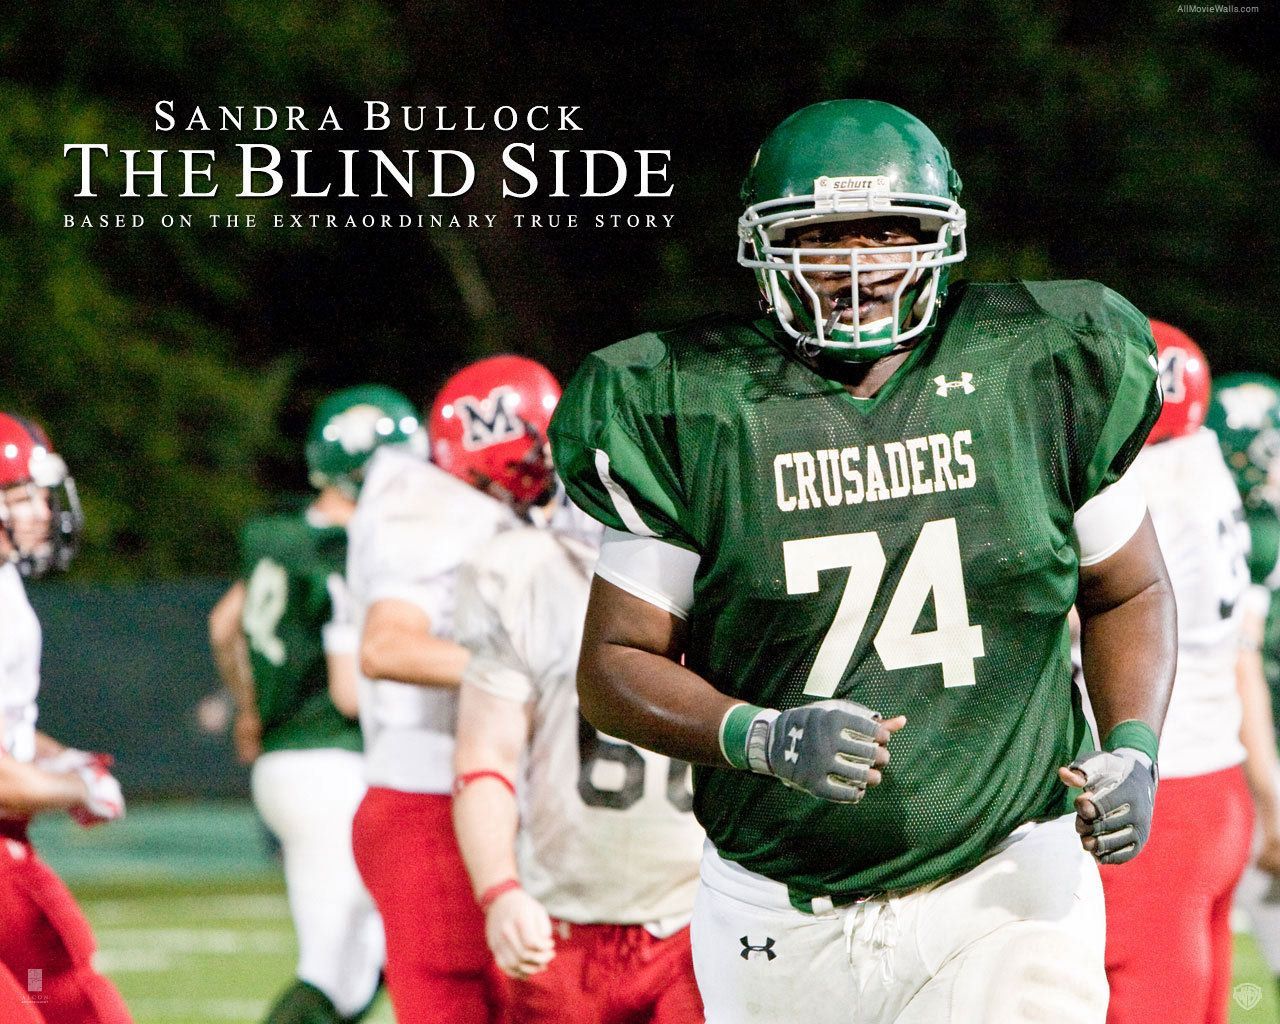 Movies Wallpaper: The Blind Side. The blind side, Back to school movie, Football movies